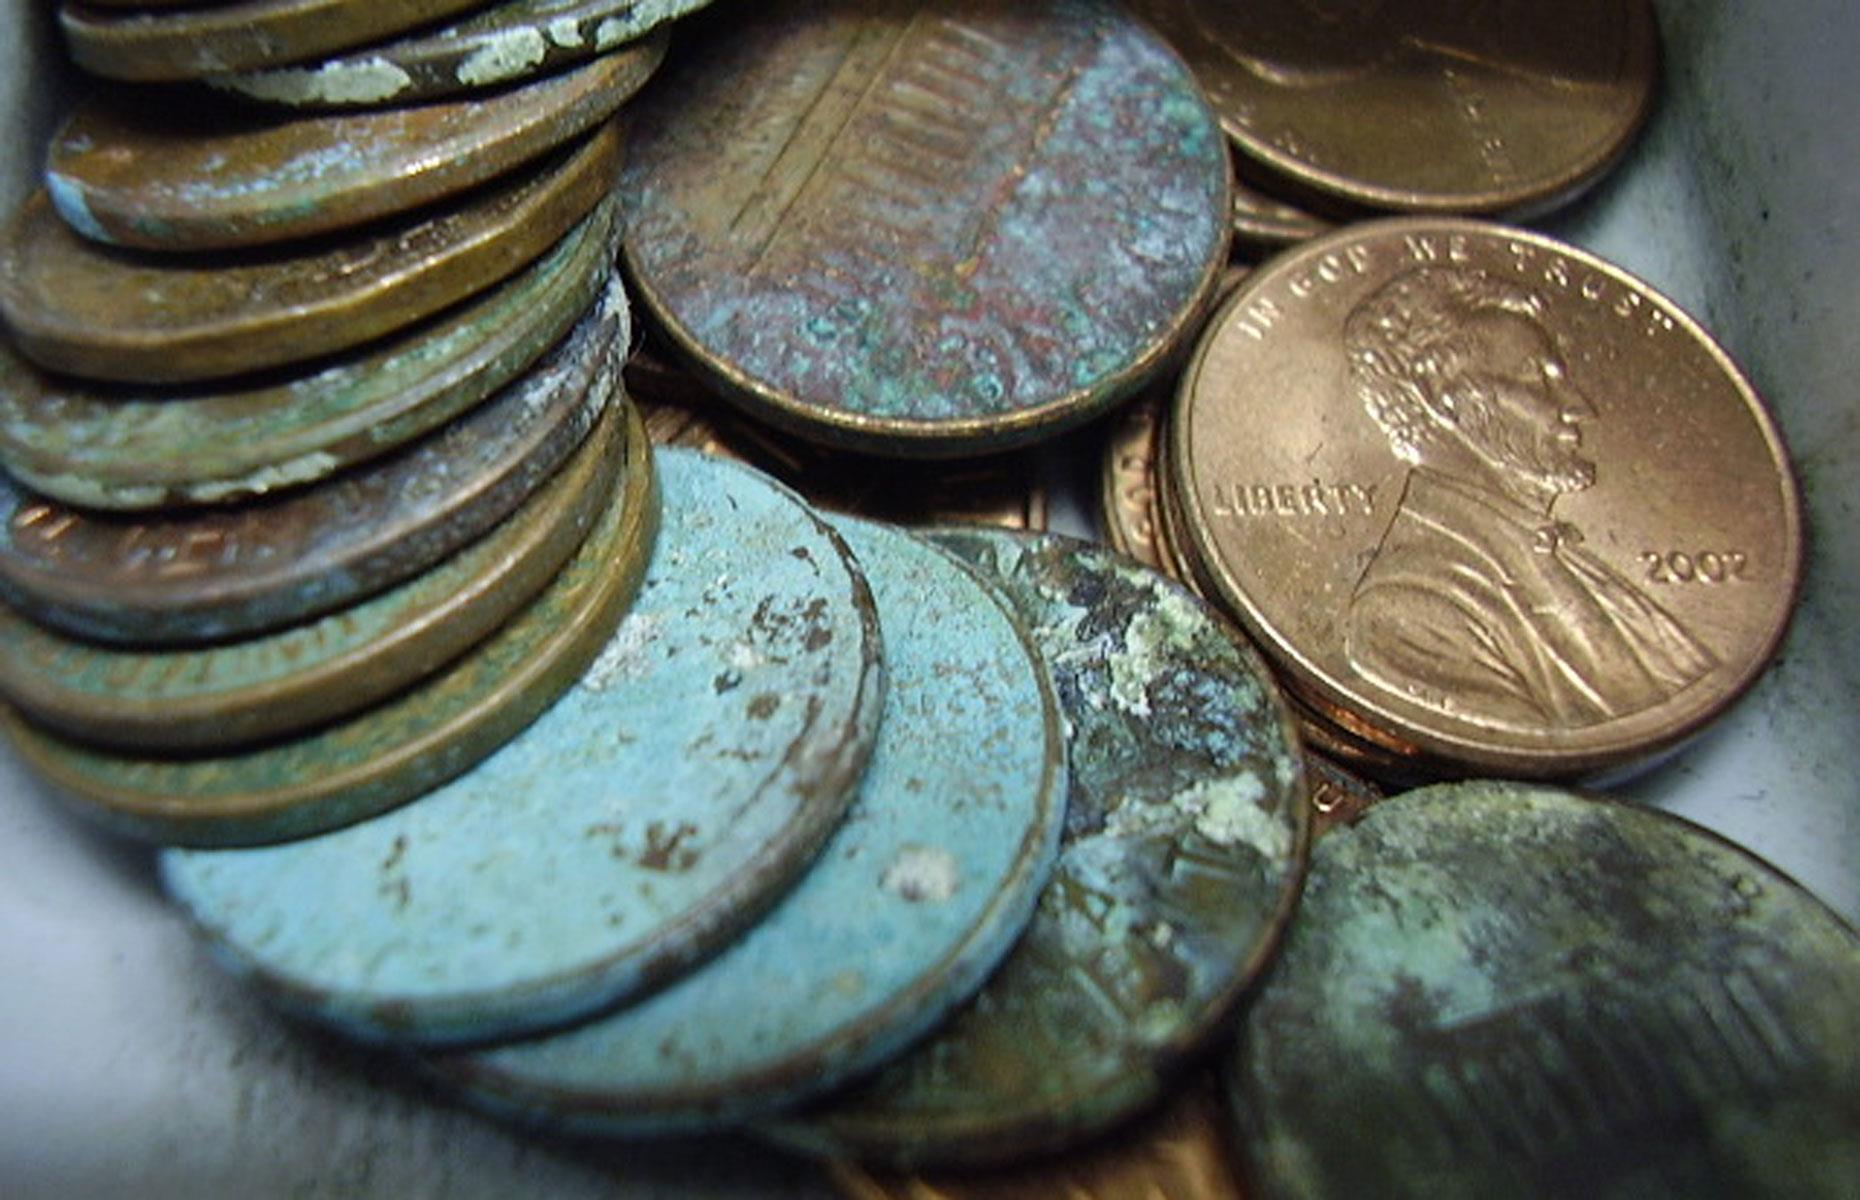 Moldy notes and coins may pose a health risk for some people